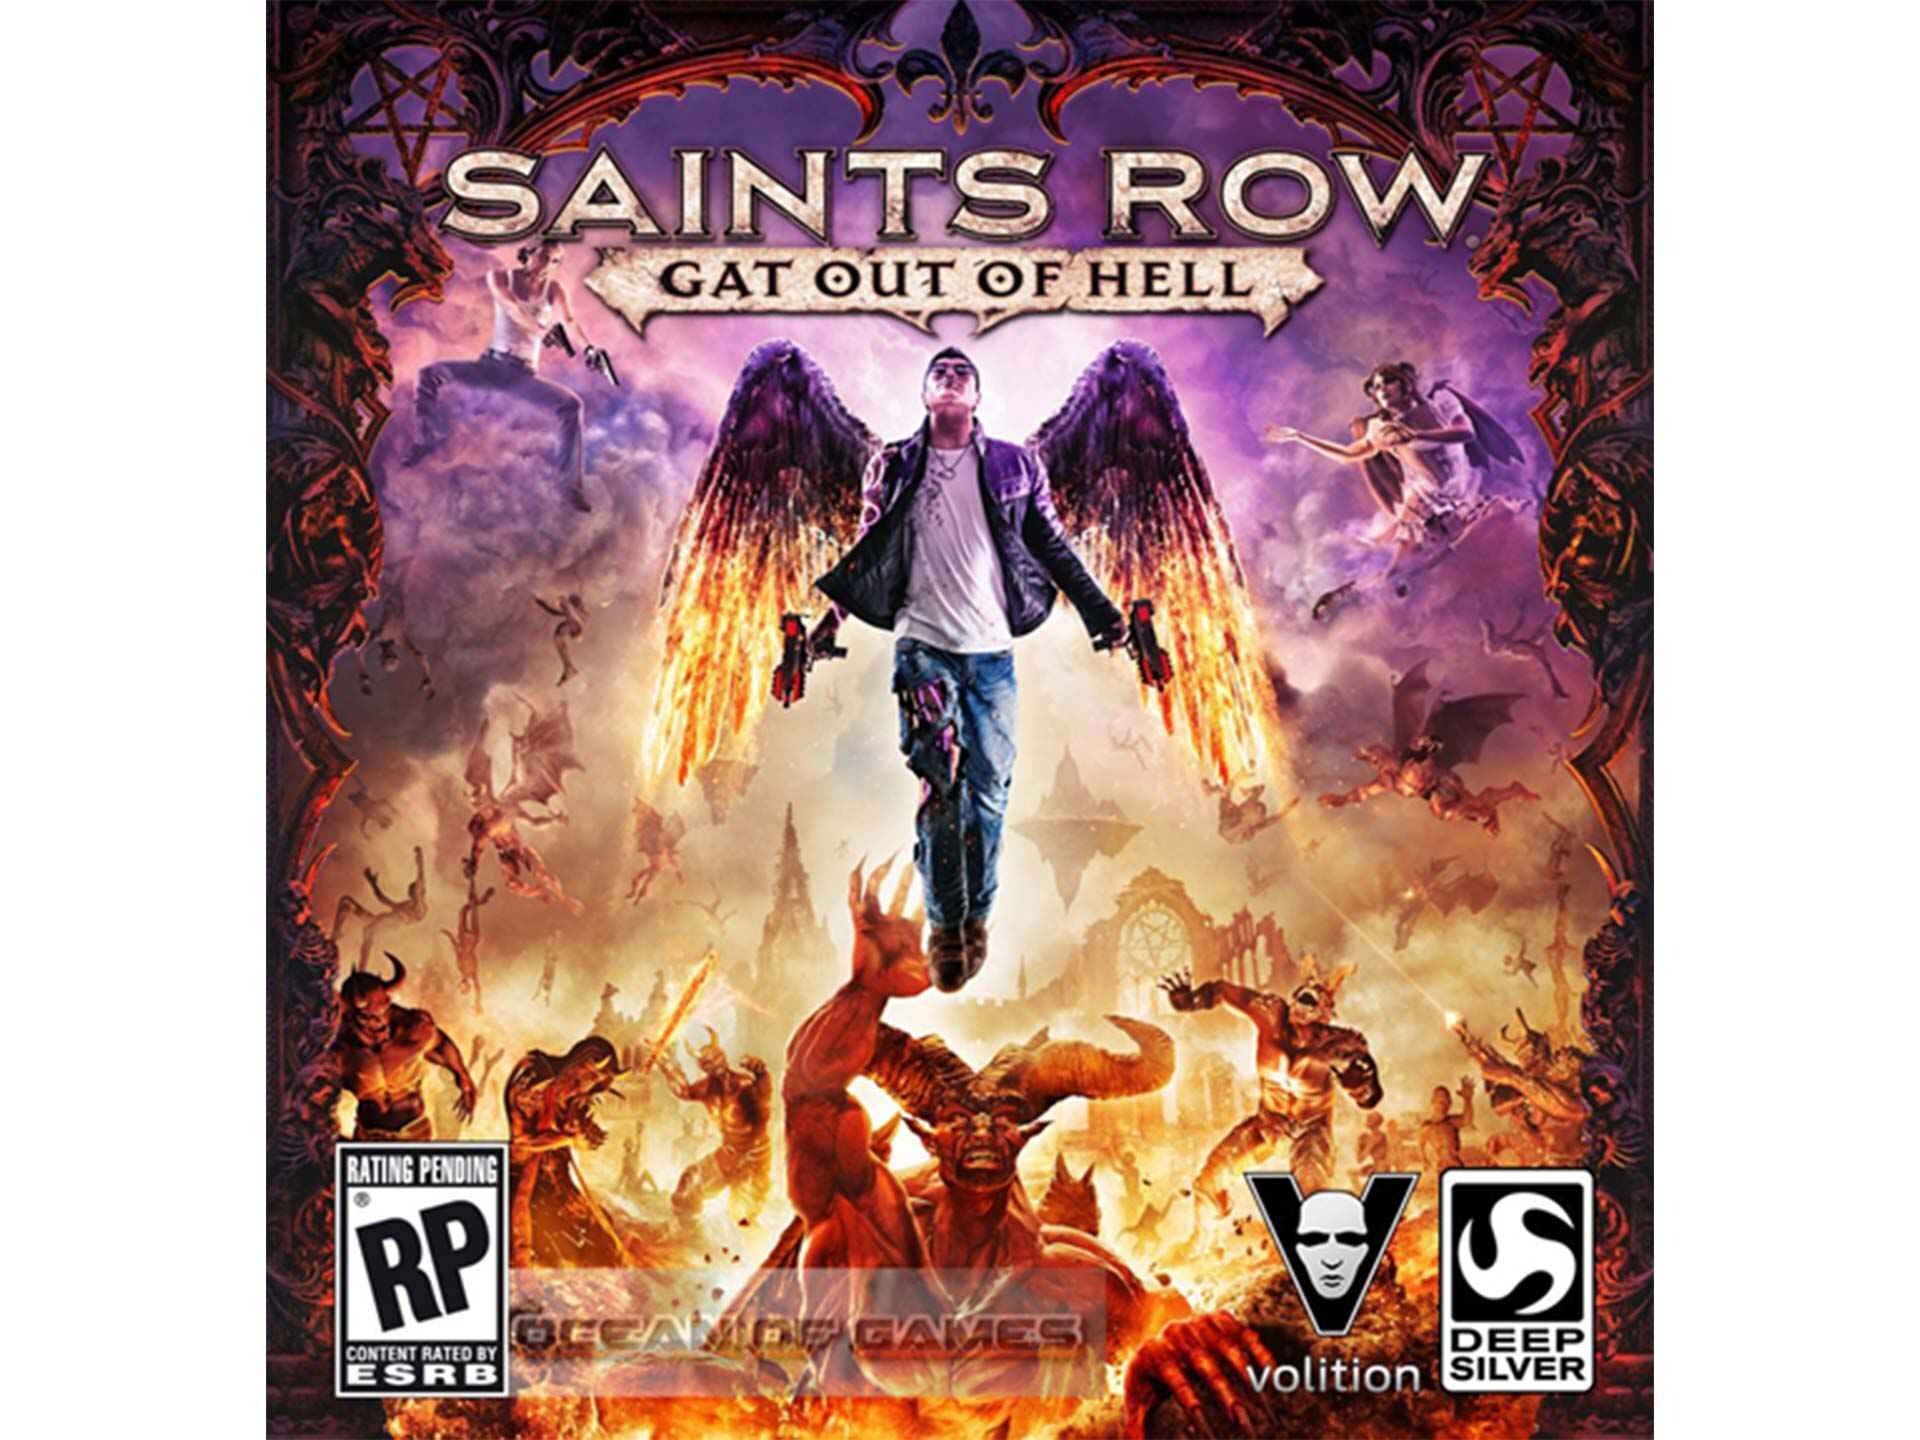 saints row gat out of hell wallpaper